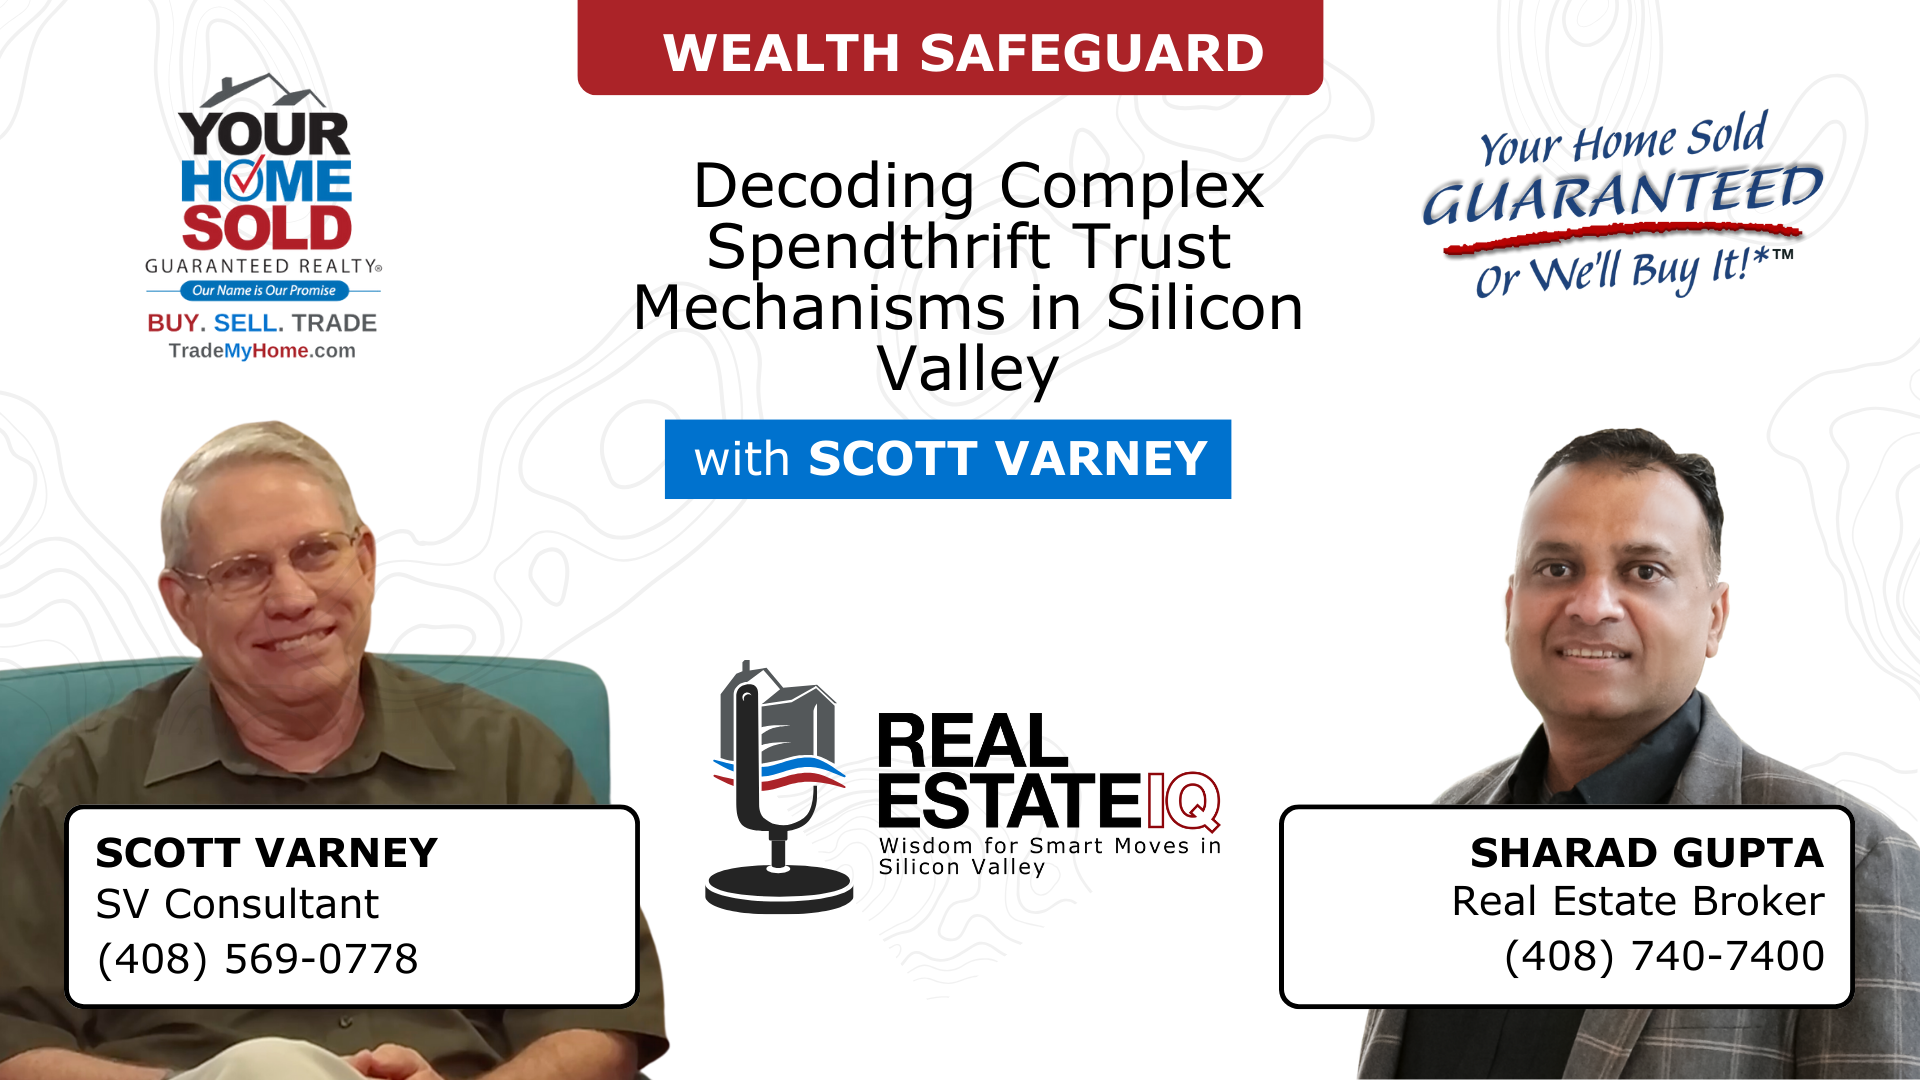 Wealth Safeguard: Decoding Complex Spendthrift Trust Mechanisms in Silicon Valley